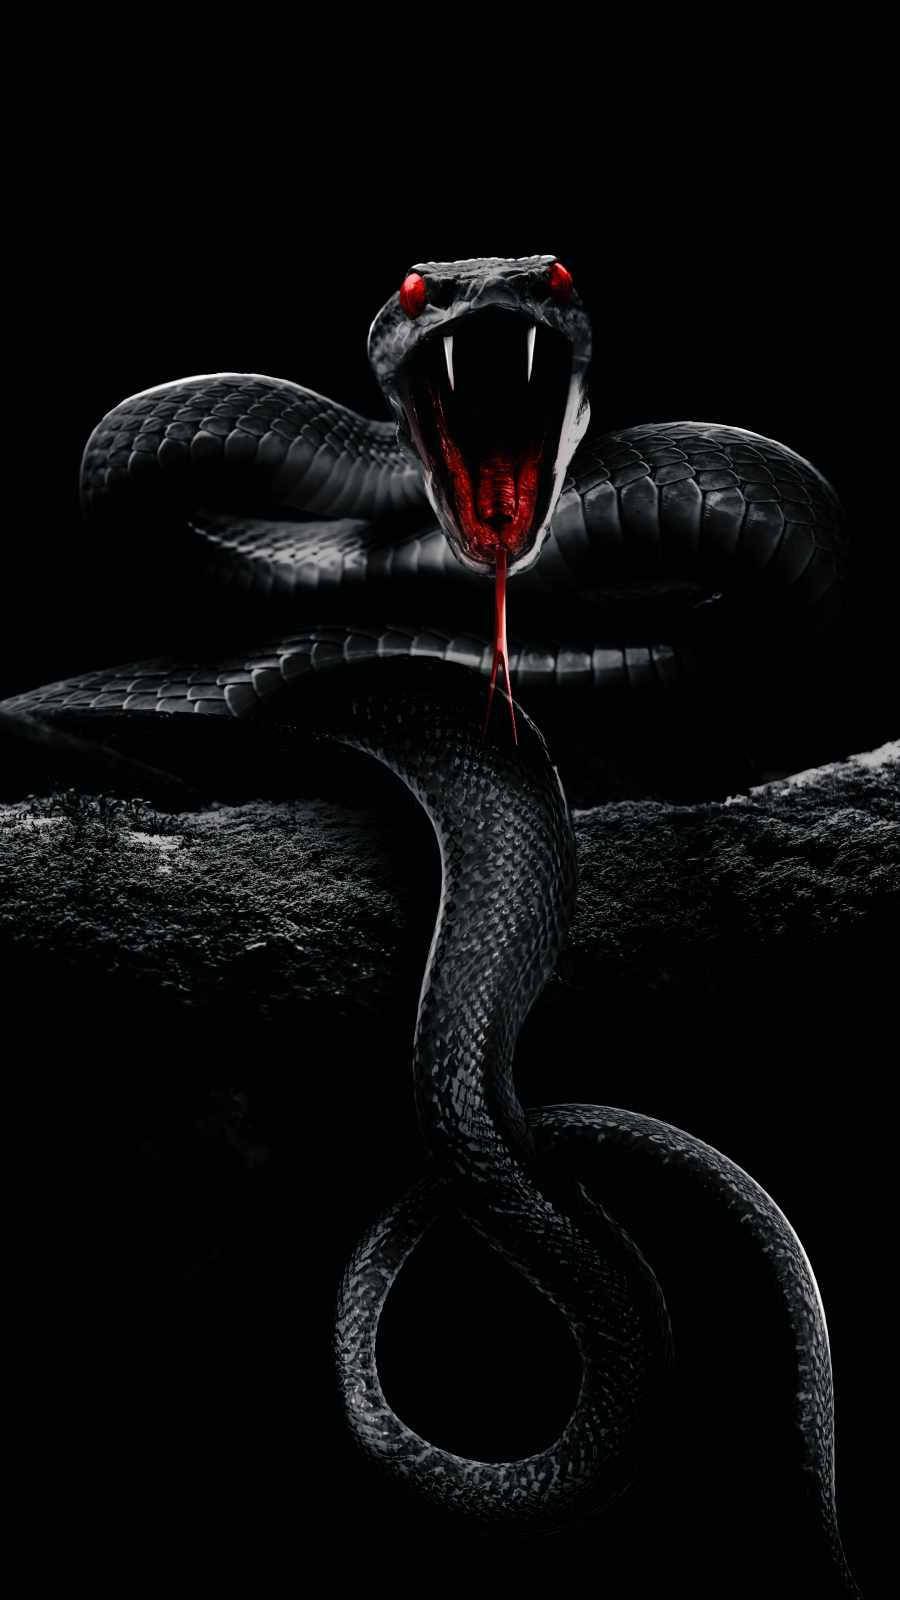 Black snake with red eyes and blood on its tongue - Snake